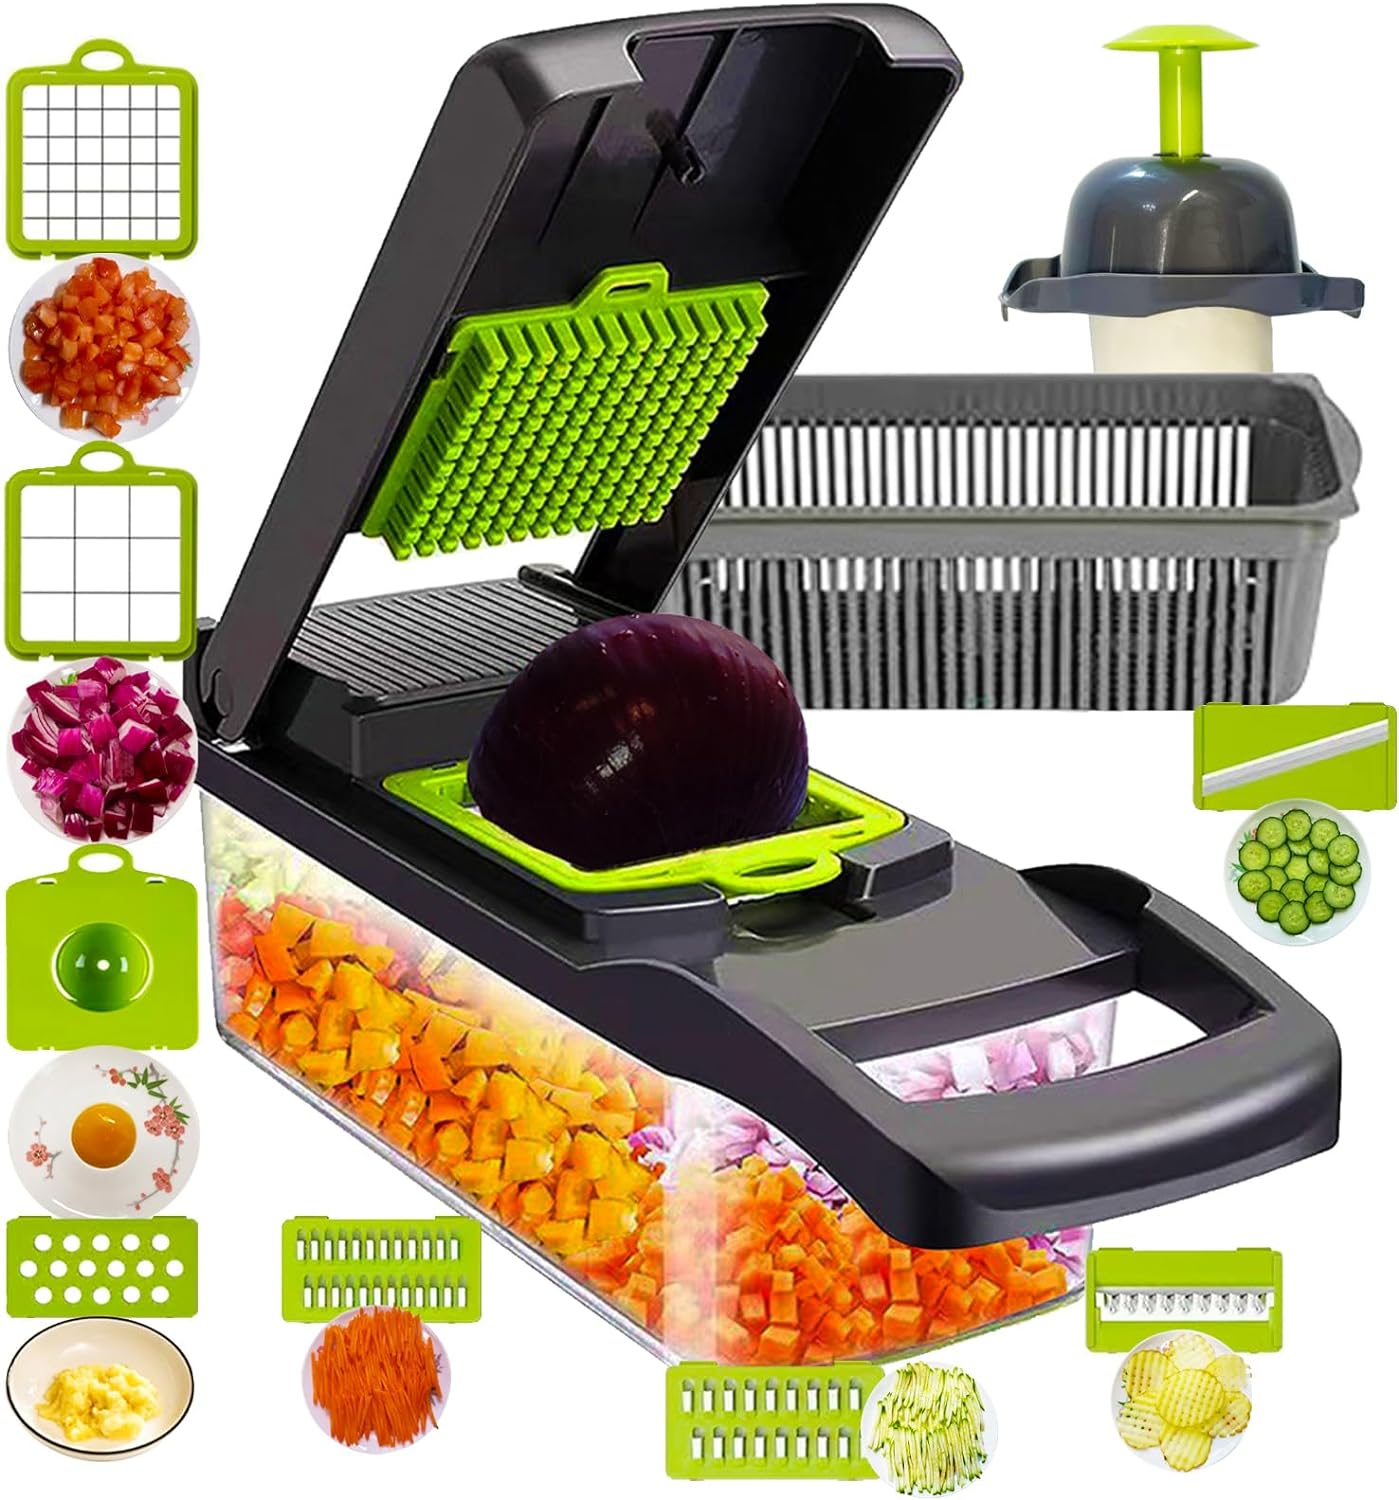 Multifunctional15-in-1 Mukor vegetable chopper With container, Pro food Vegetable Chopper and Slicer， Onion Chopper,Veggie Chopper, Vegetables Cutter, Slicer Dicer Cutter ，Easy to Clean (Gray)